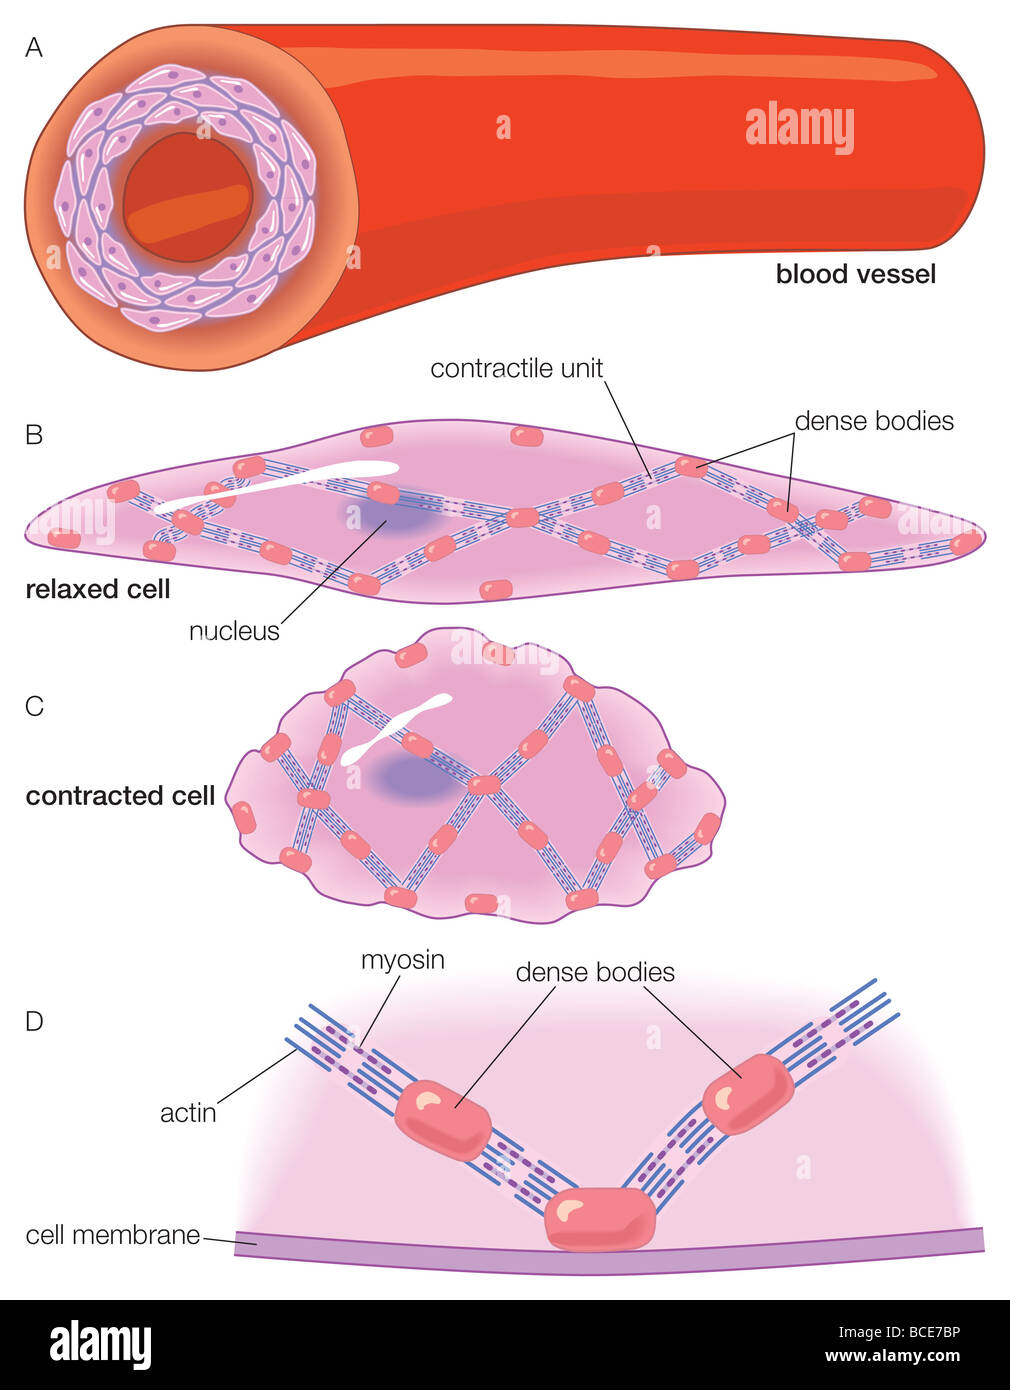 The artery wall and the ultrastructure of the smooth muscle cells within it. Stock Photo